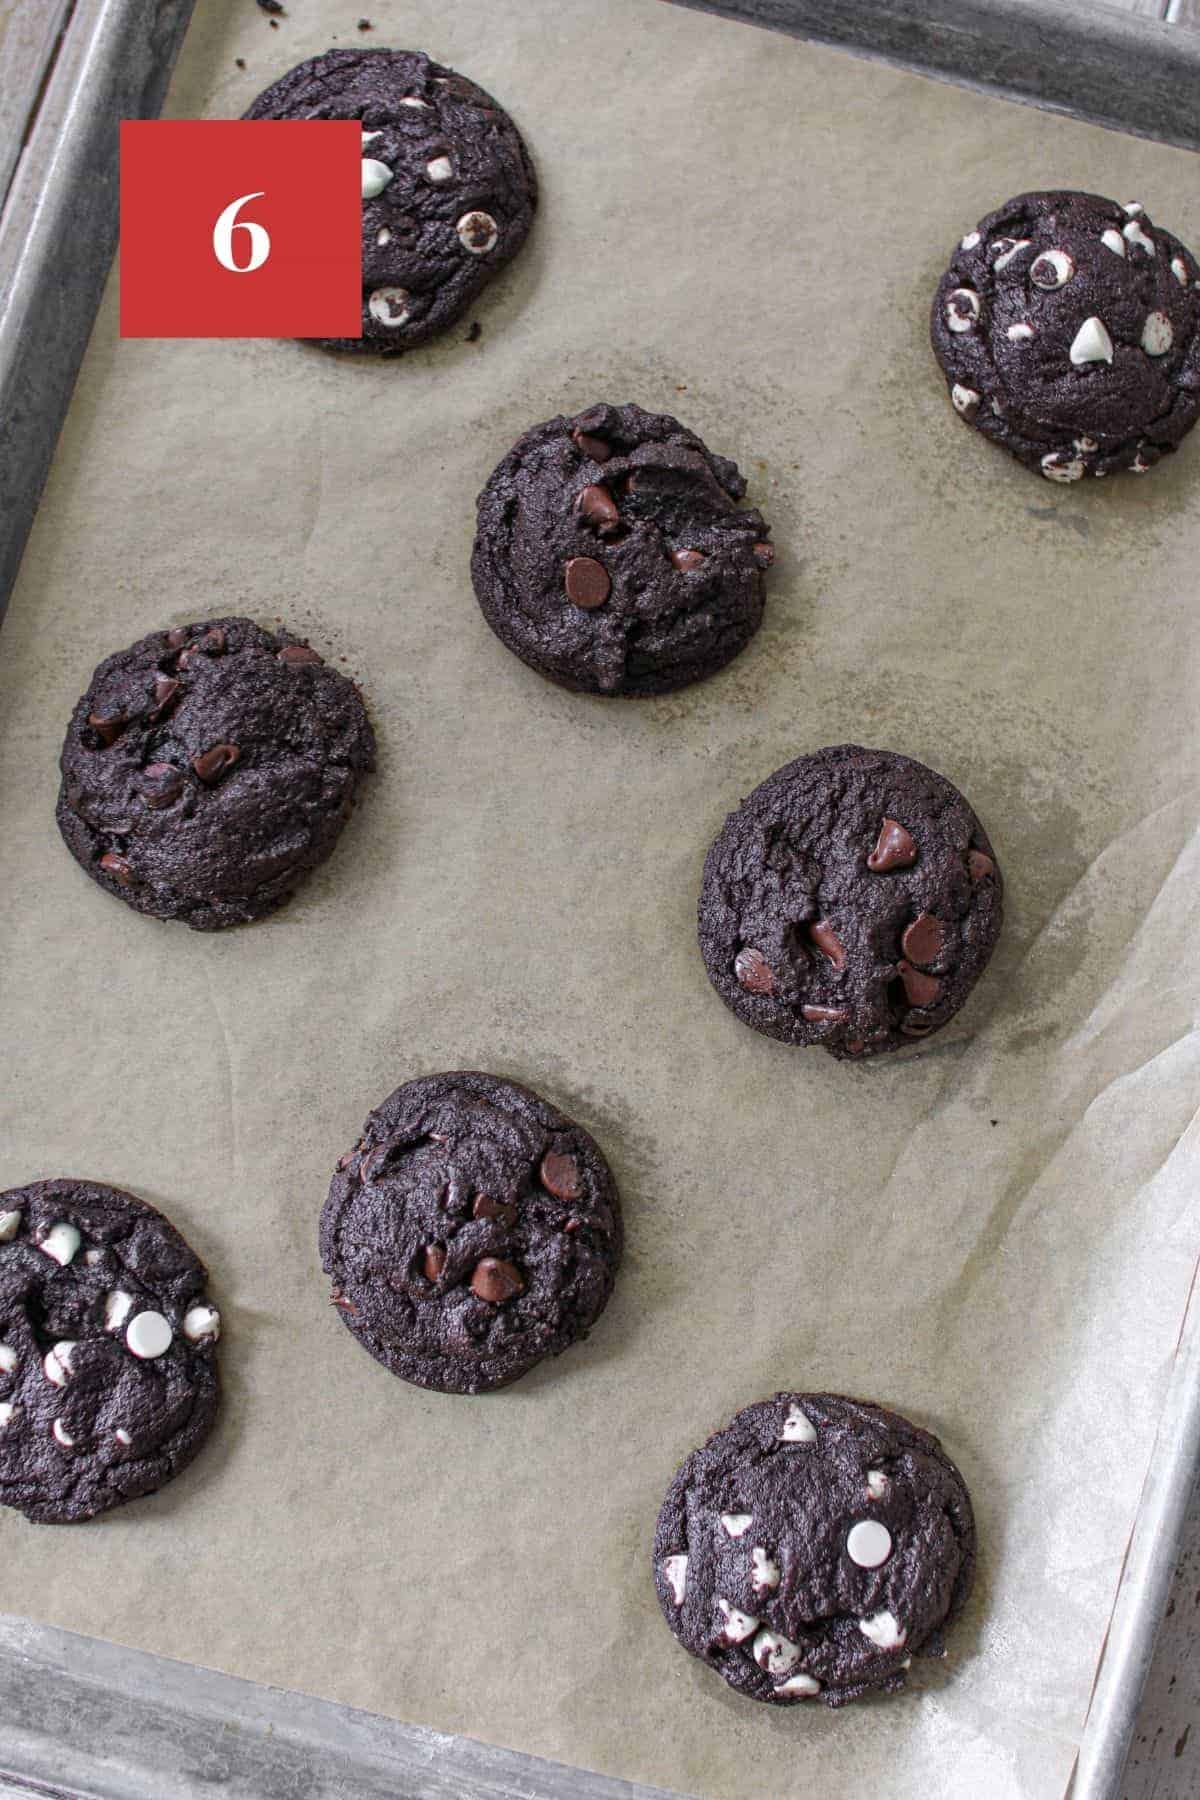 A baking sheet pan with 8 baked double chocolate cookies on the sheet spread out. 4 cookies with white chocolate chips and 4 cookies with semi-sweet chocolate chips. The baking sheet sits on a wood plank background.  In the upper left corner is a dark red square with a white '6' in the center.